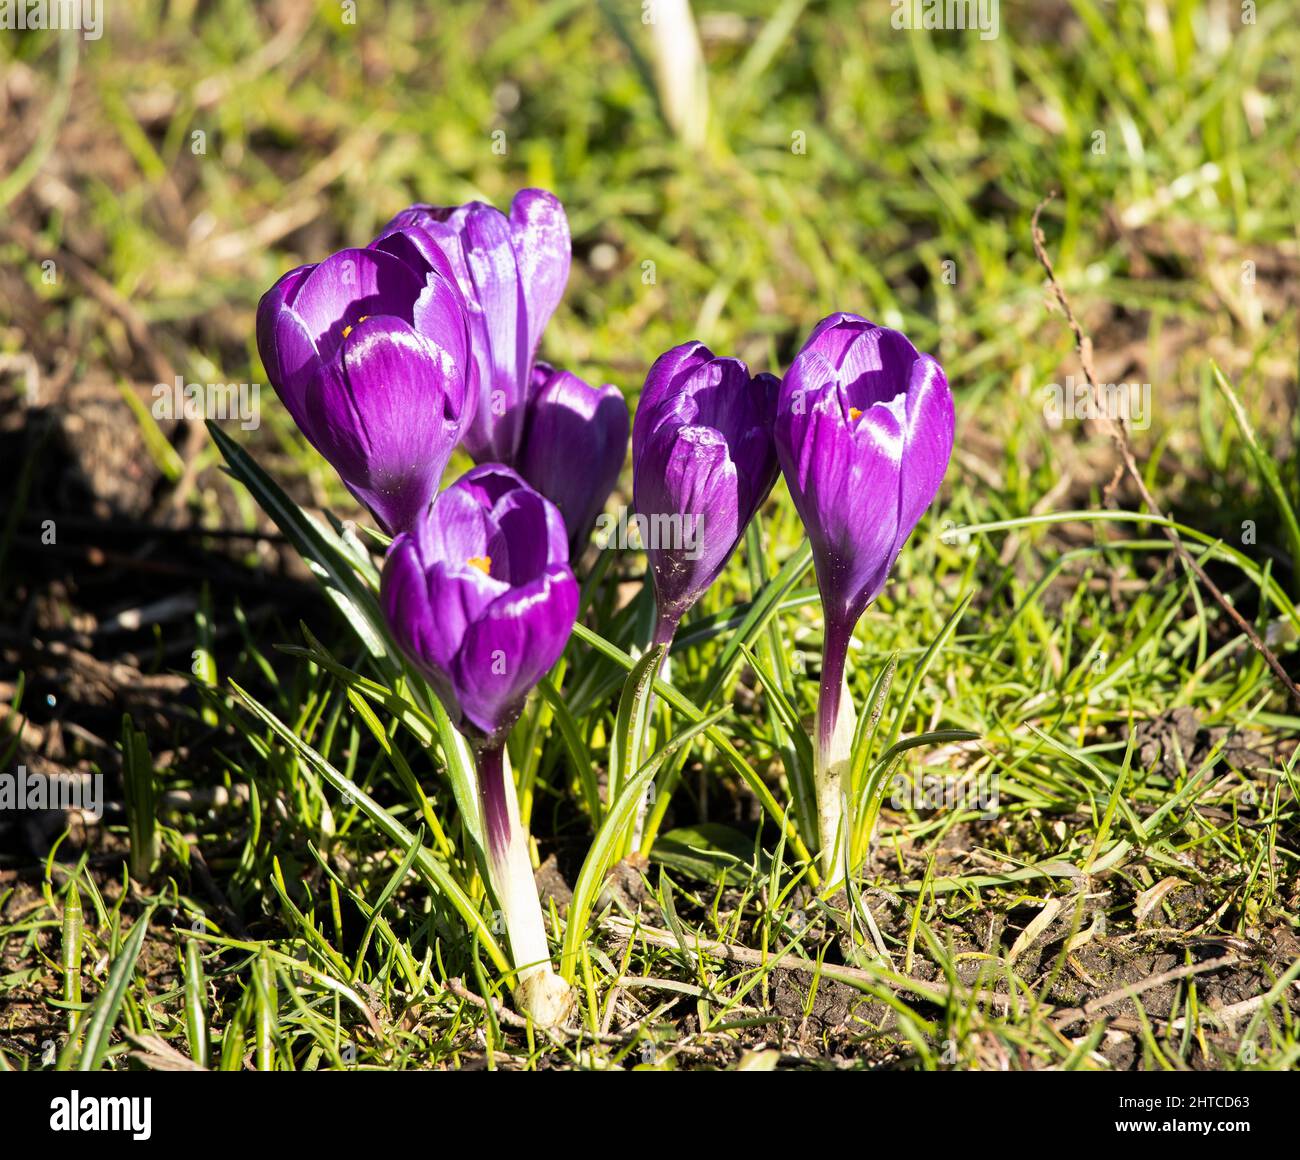 The Crocus is an early blooming spring flower that brings spring colour to the woods and gardens of Northern Europe. Stock Photo